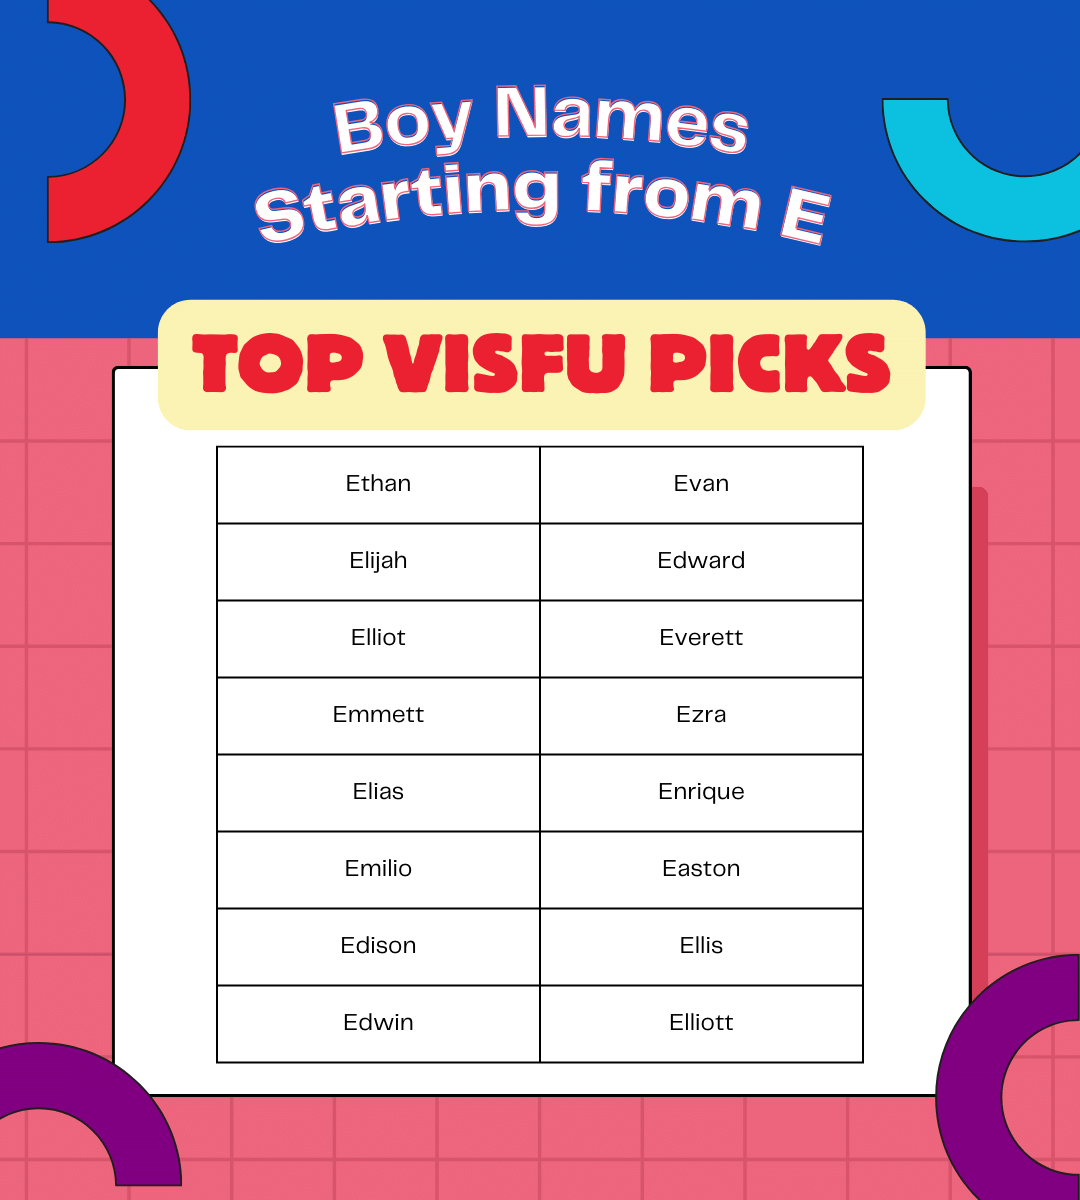 Boy names starting from E